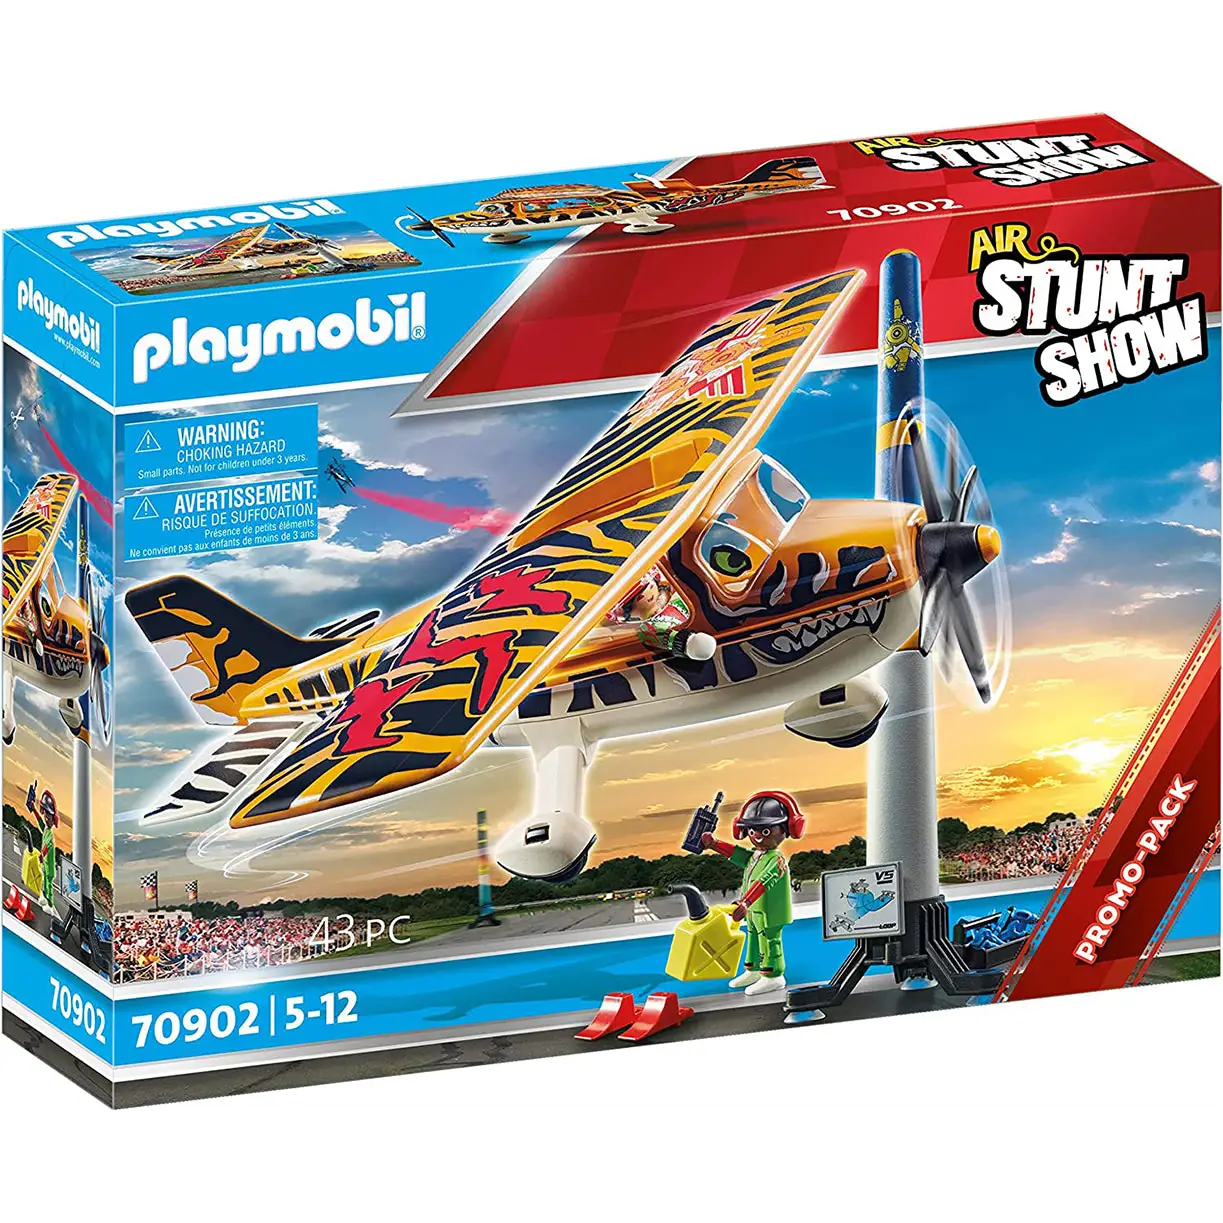 Playmobil Air Stunt Show Tiger Propeller Plane 70902 (For